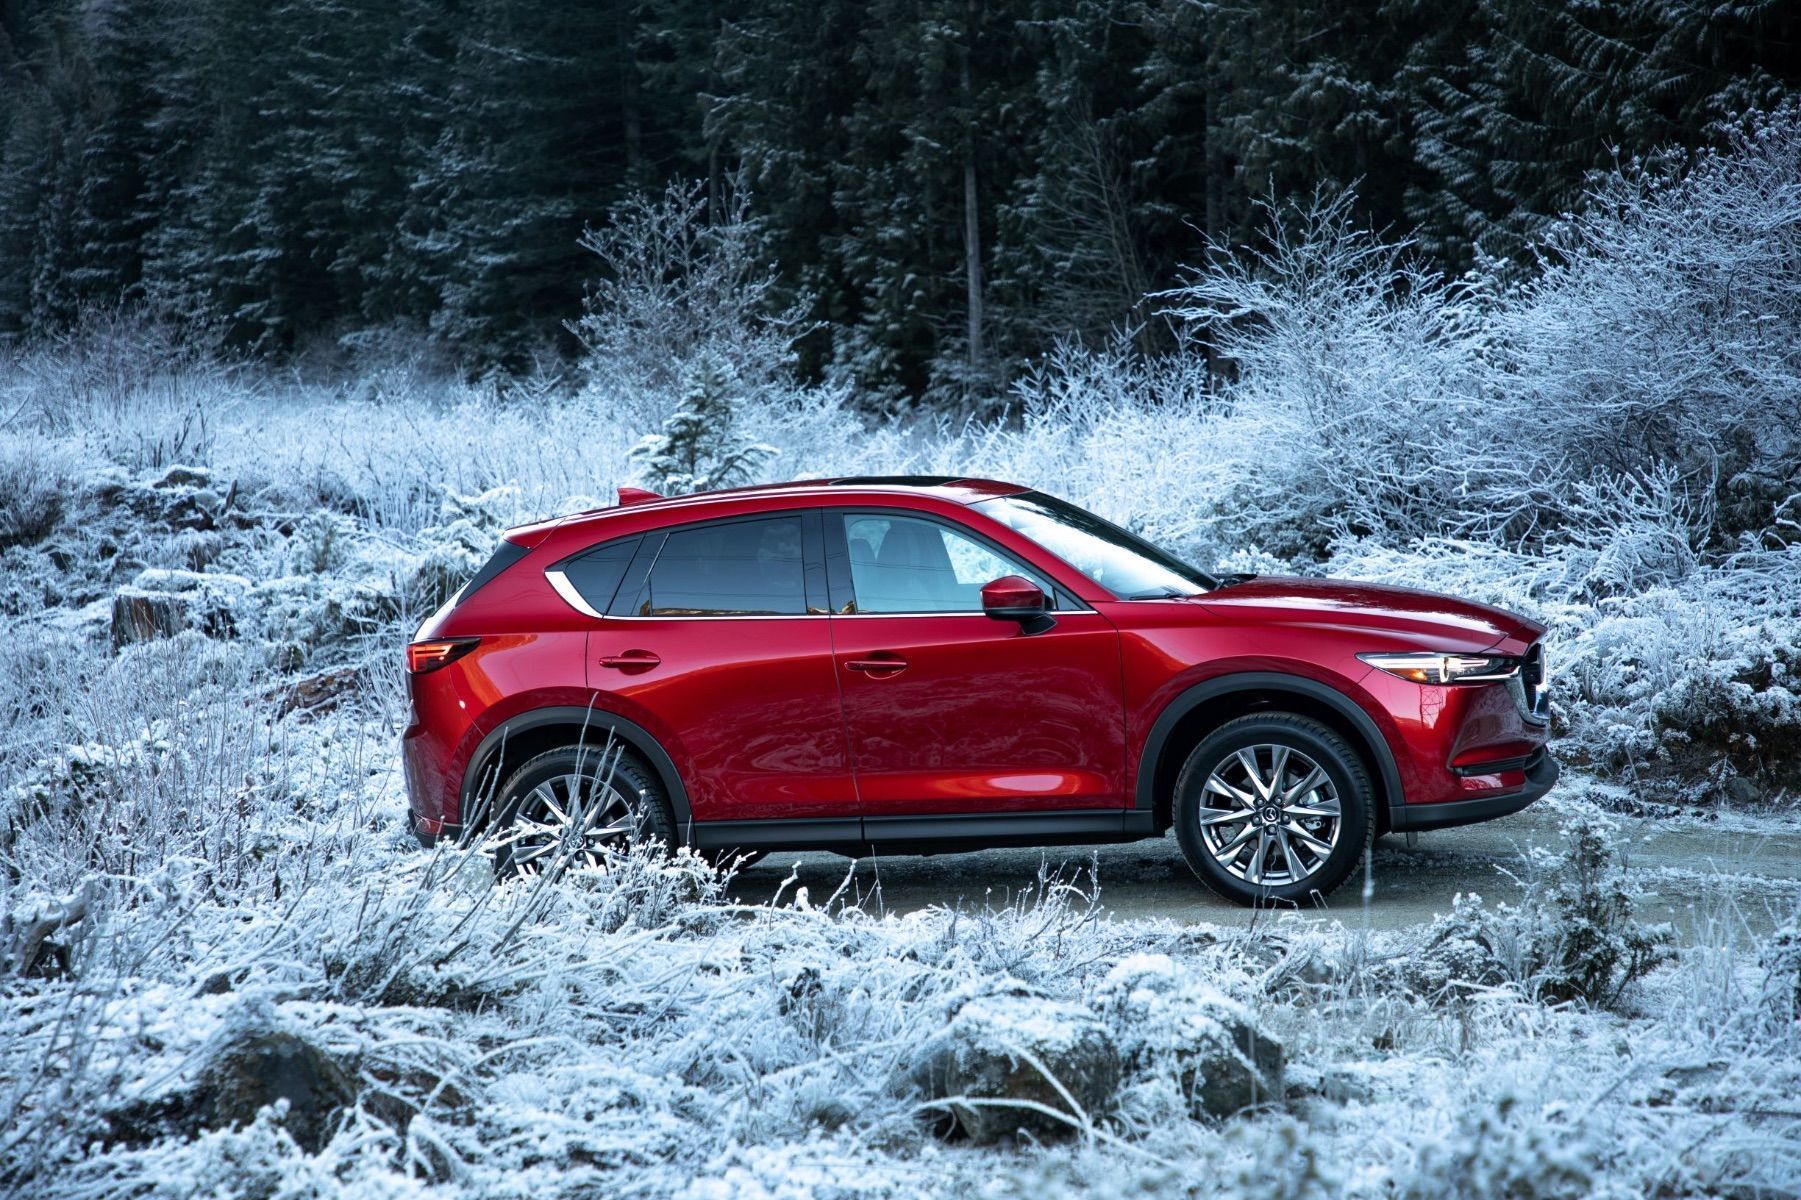 The Mazda Connected technologies that are very useful in winter